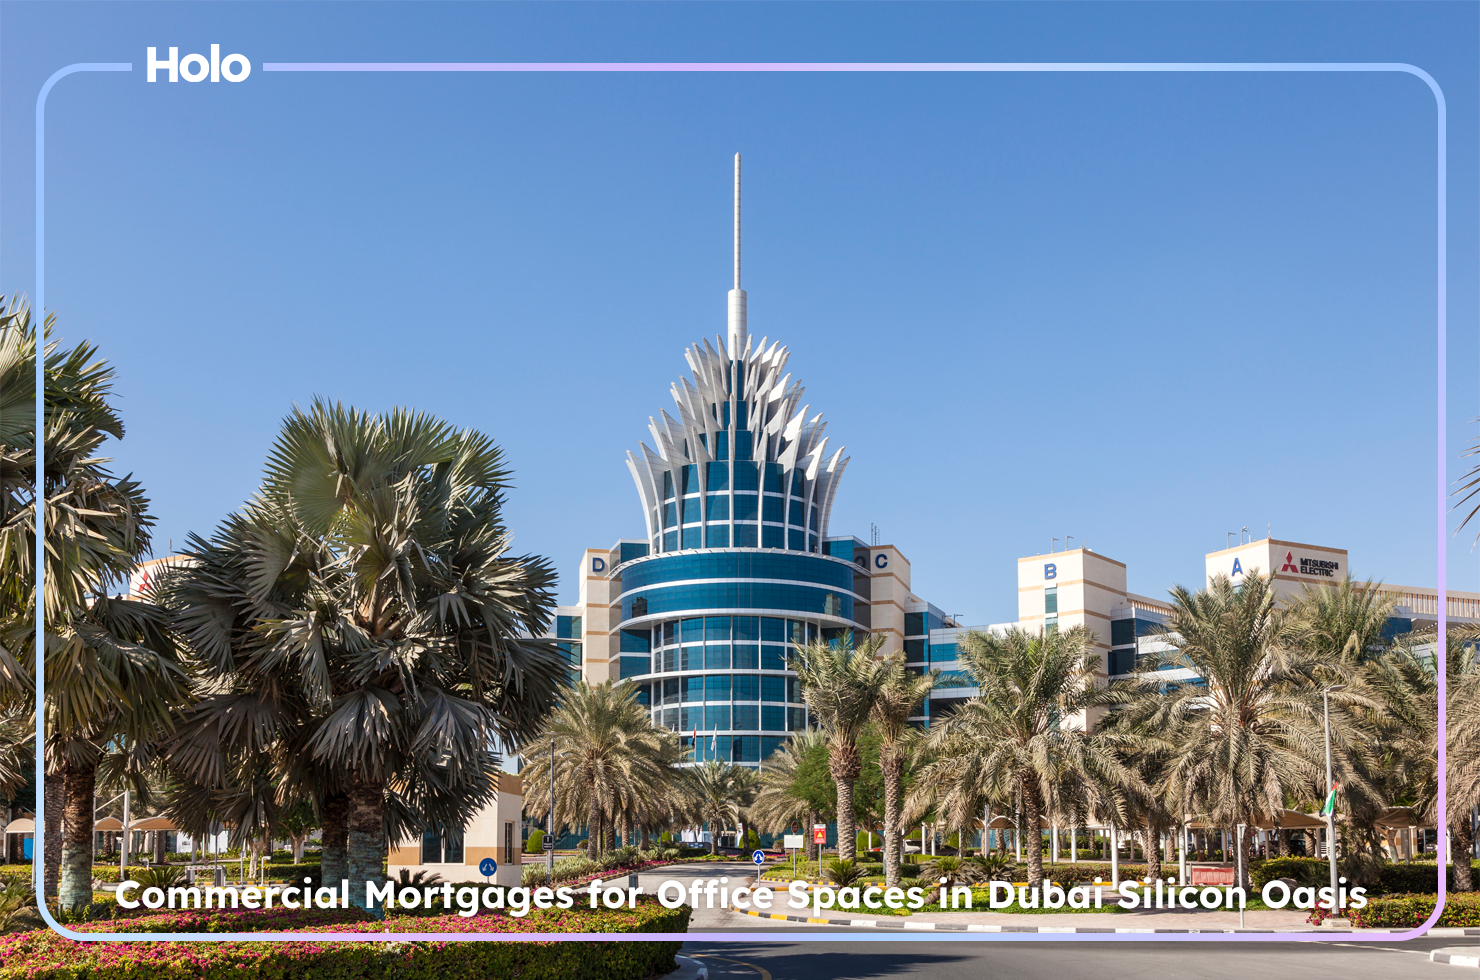 Commercial Mortgages for Office Spaces in Dubai Silicon Oasis